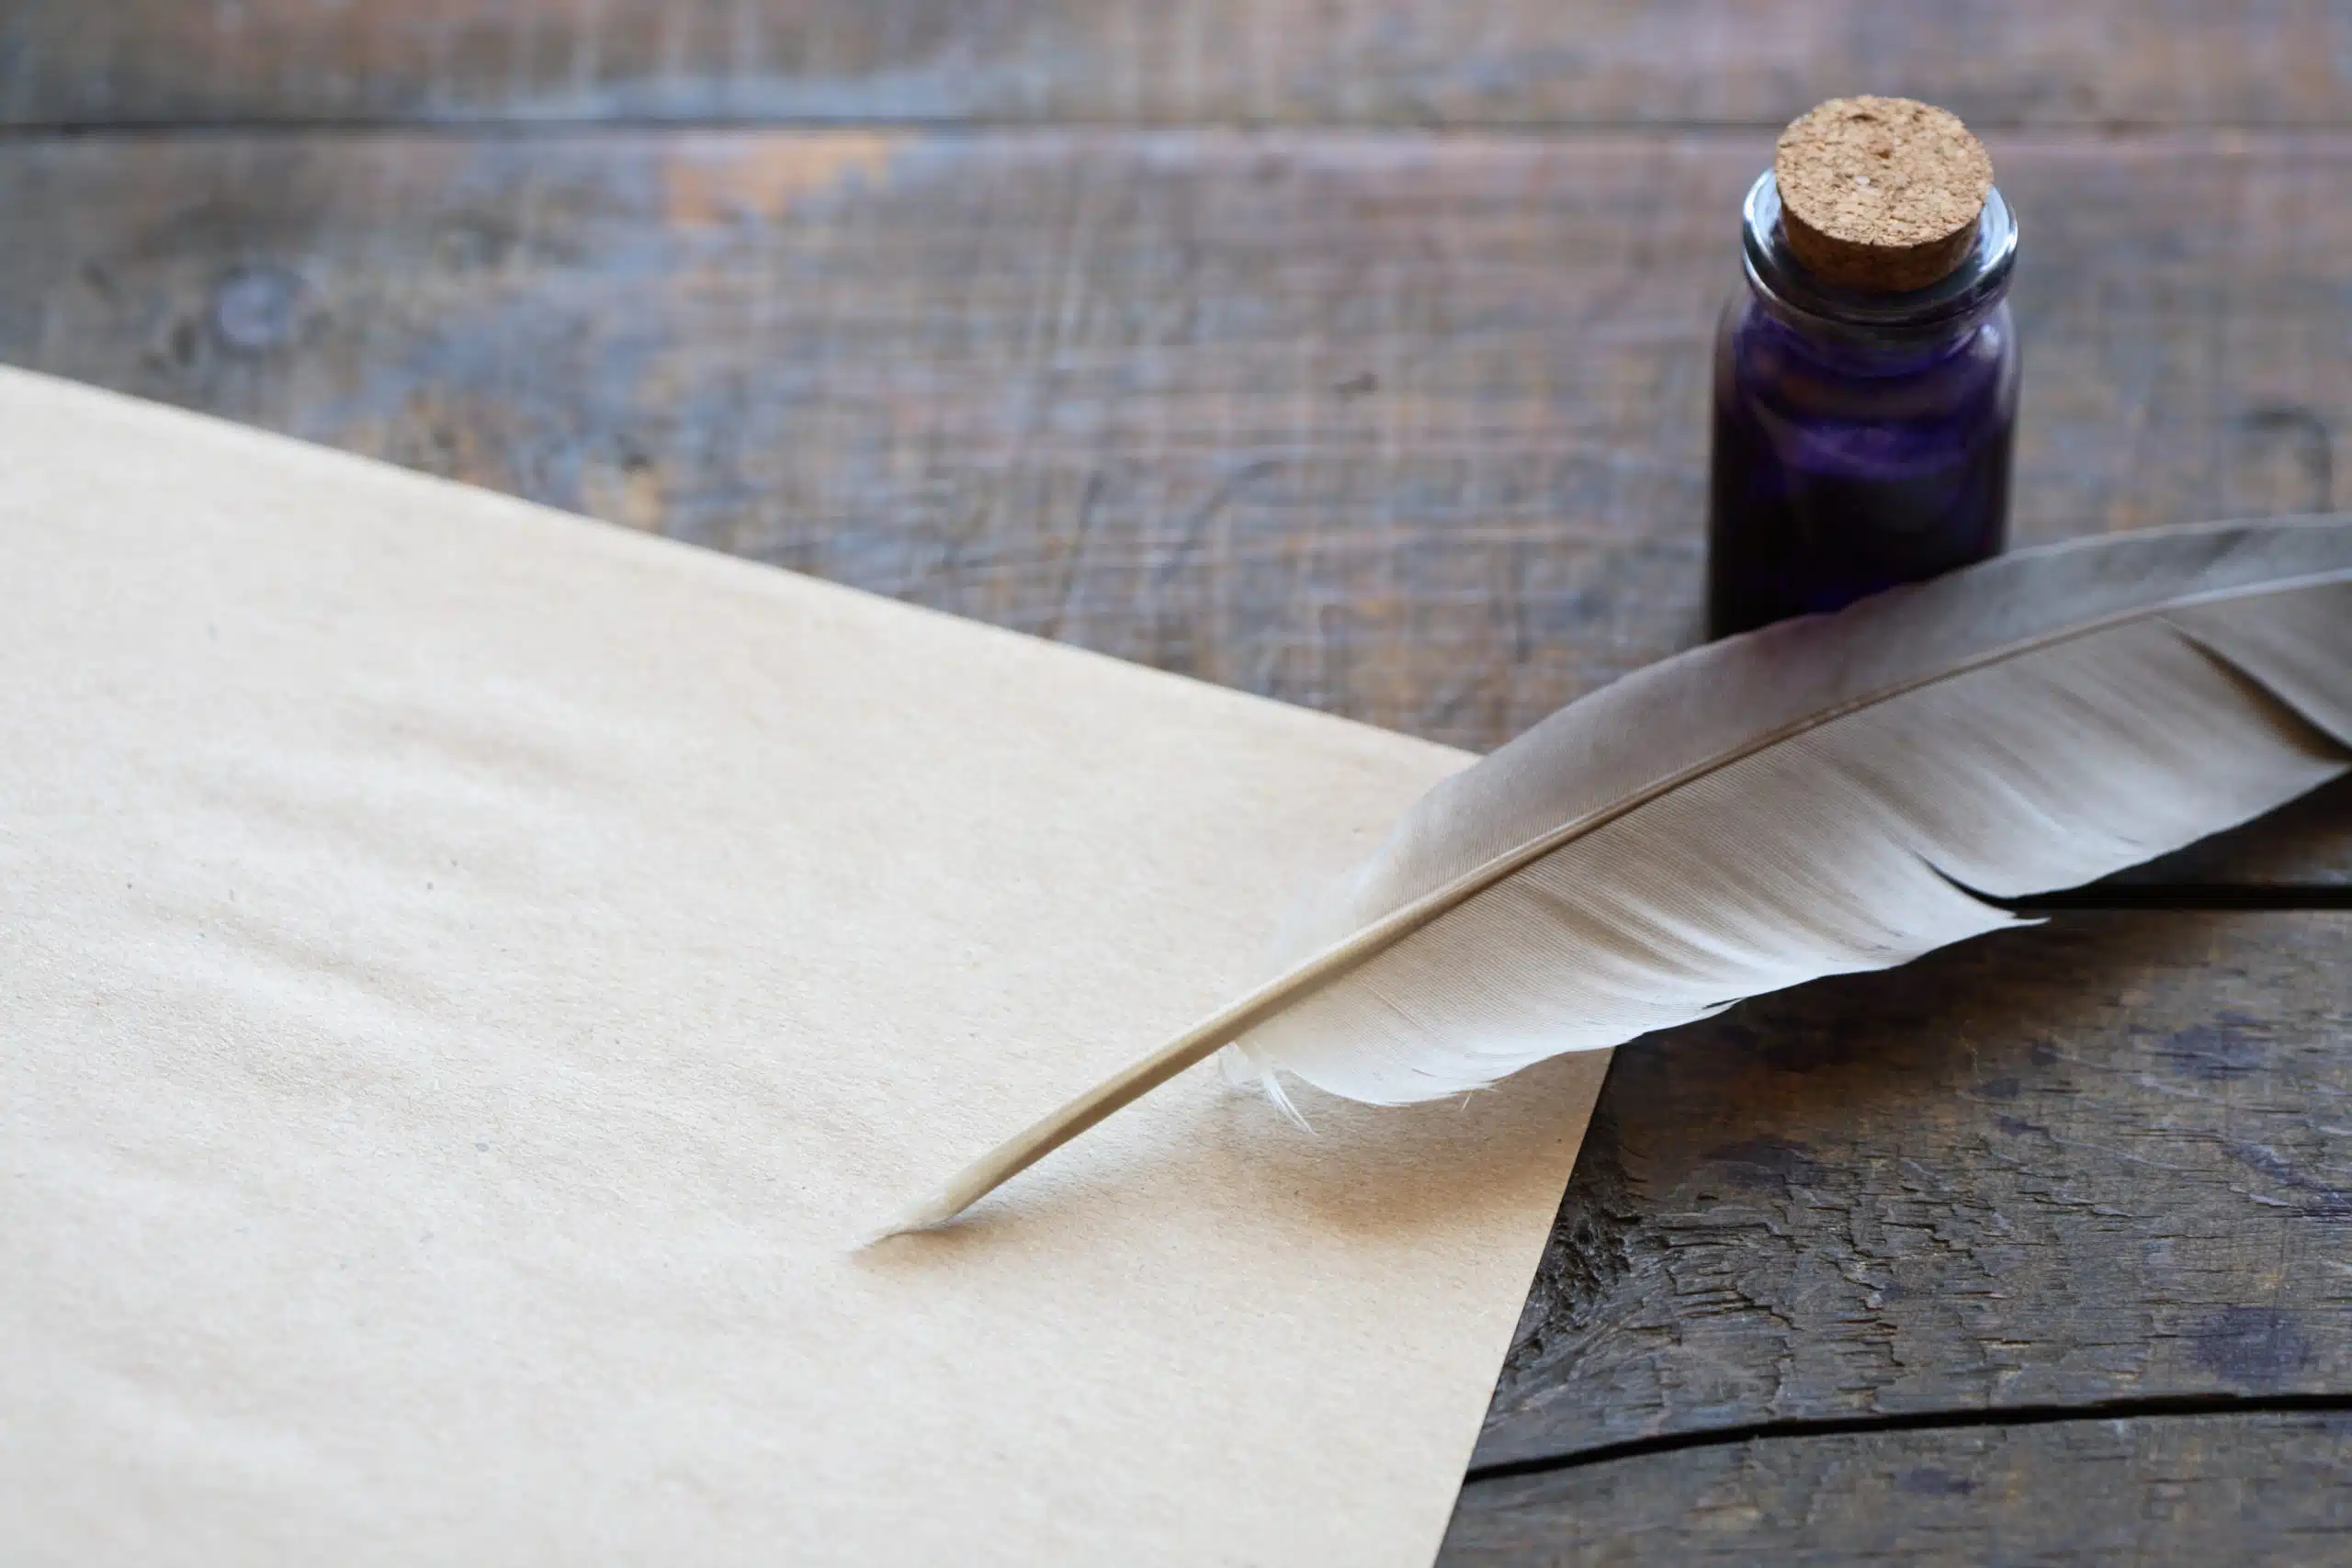 Scroll, quill, and inkwell on wooden desk